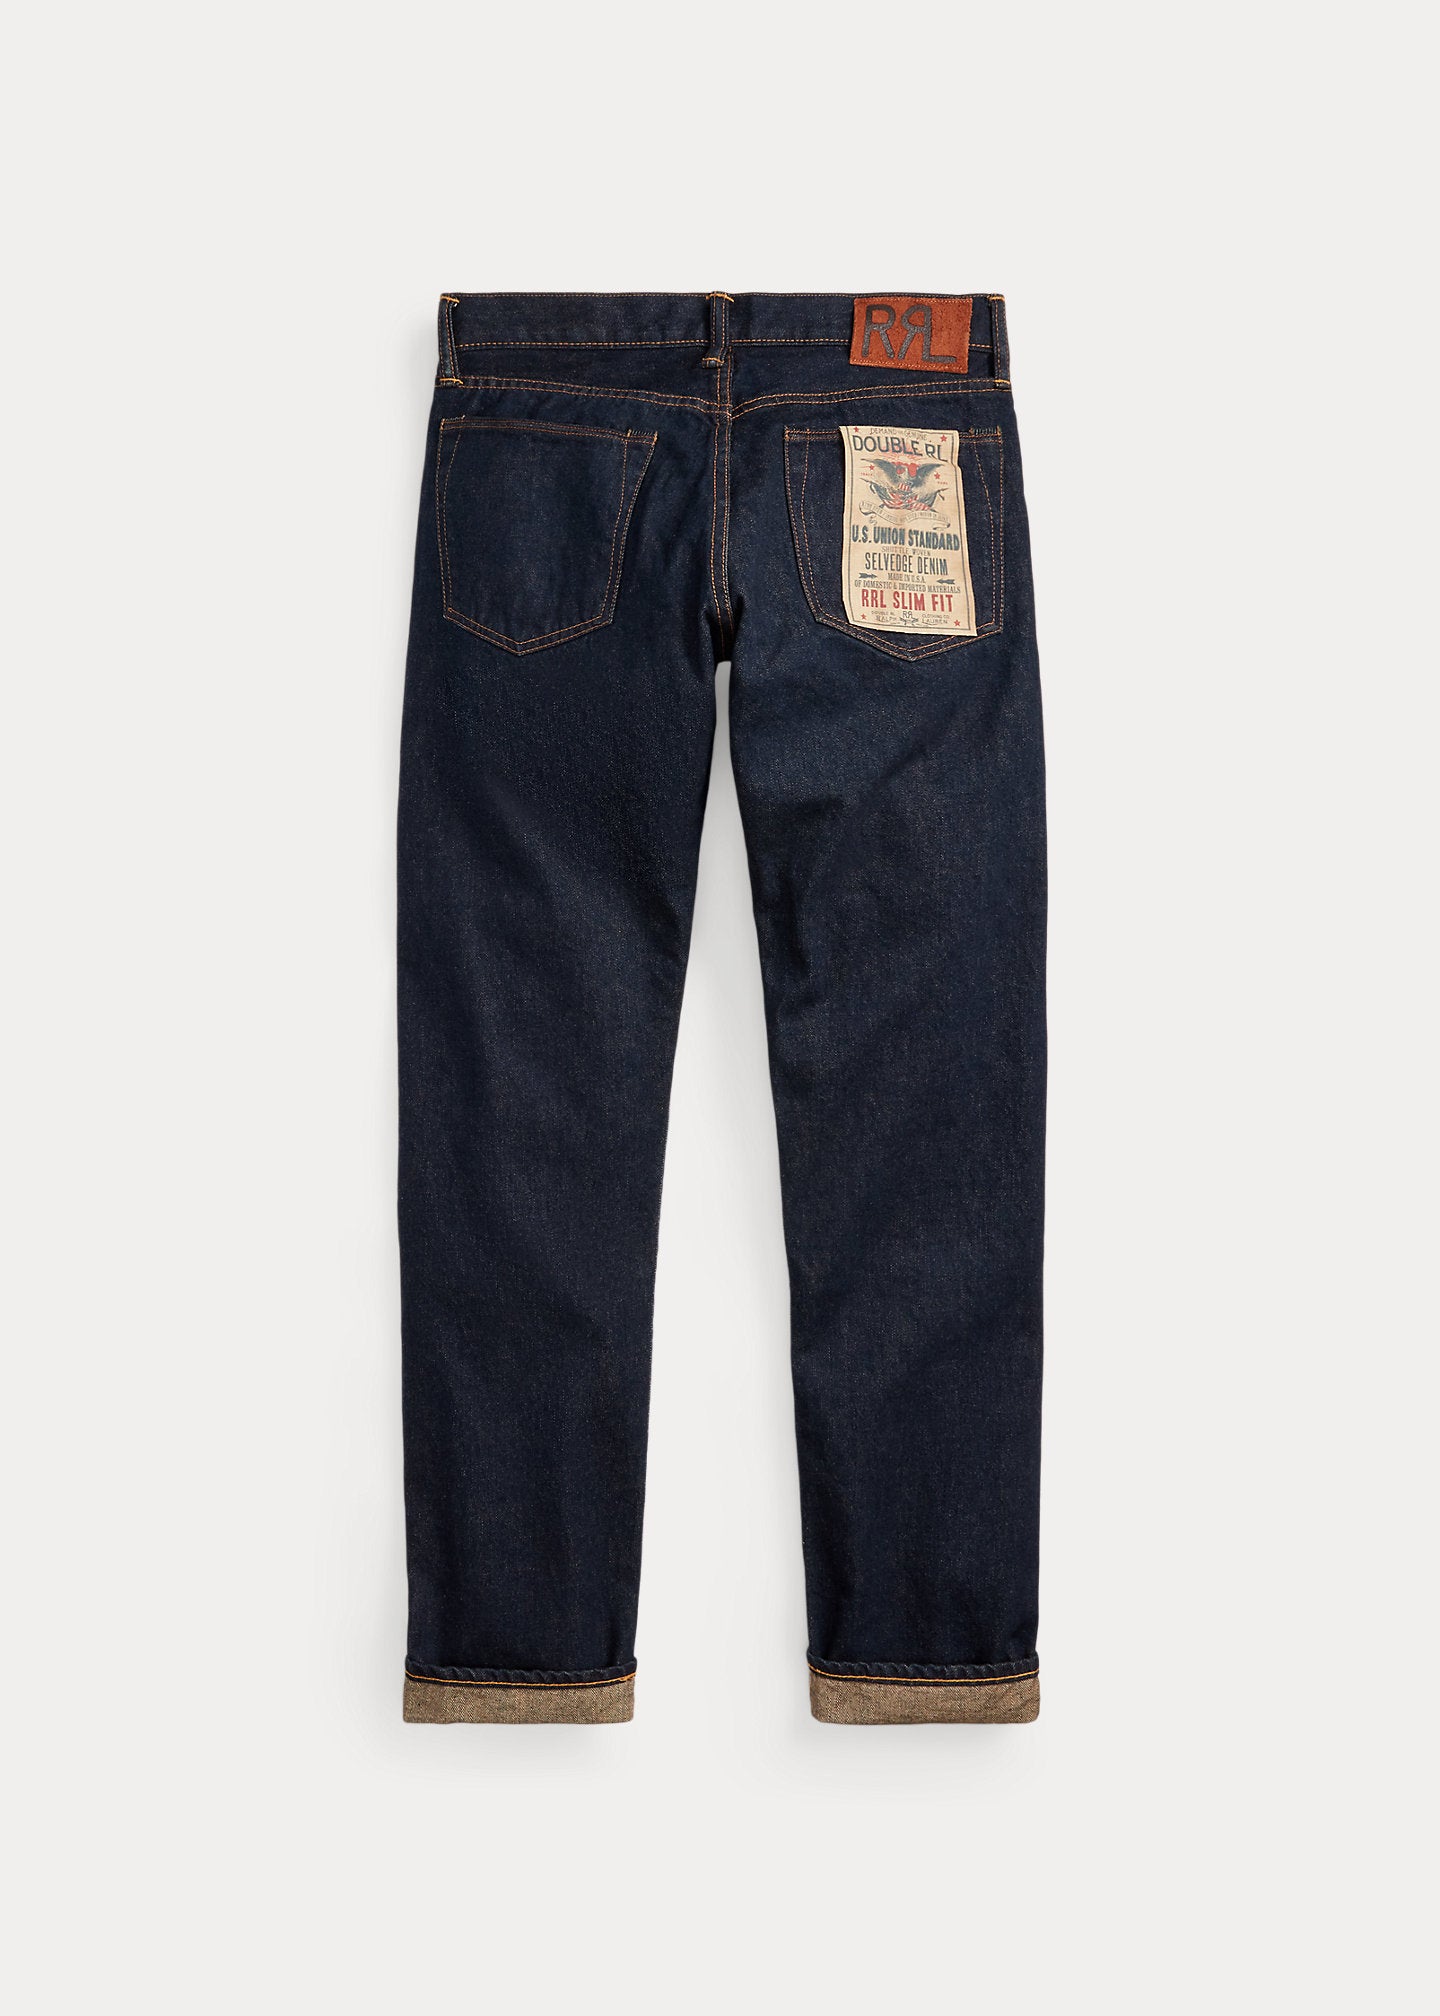 RRL double rl Men's jeans Once Wash Slim Fit Selvedge cone